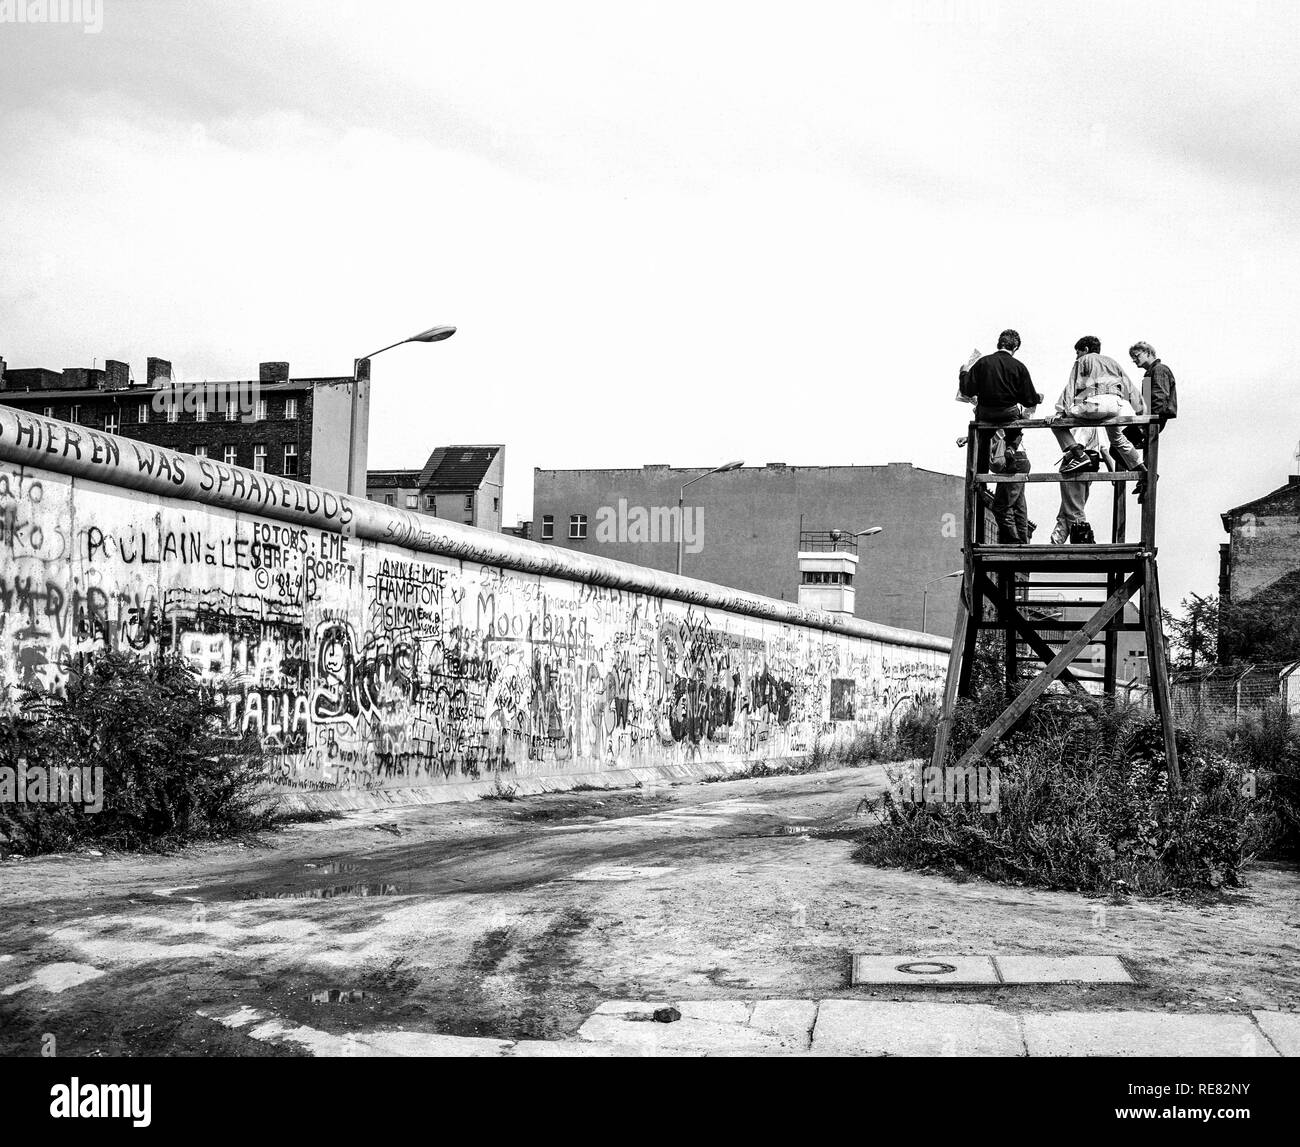 August 1986, Berlin Wall graffitis, people on observation platform looking over the Wall, Zimmerstrasse street, West Berlin side, Germany, Europe, Stock Photo